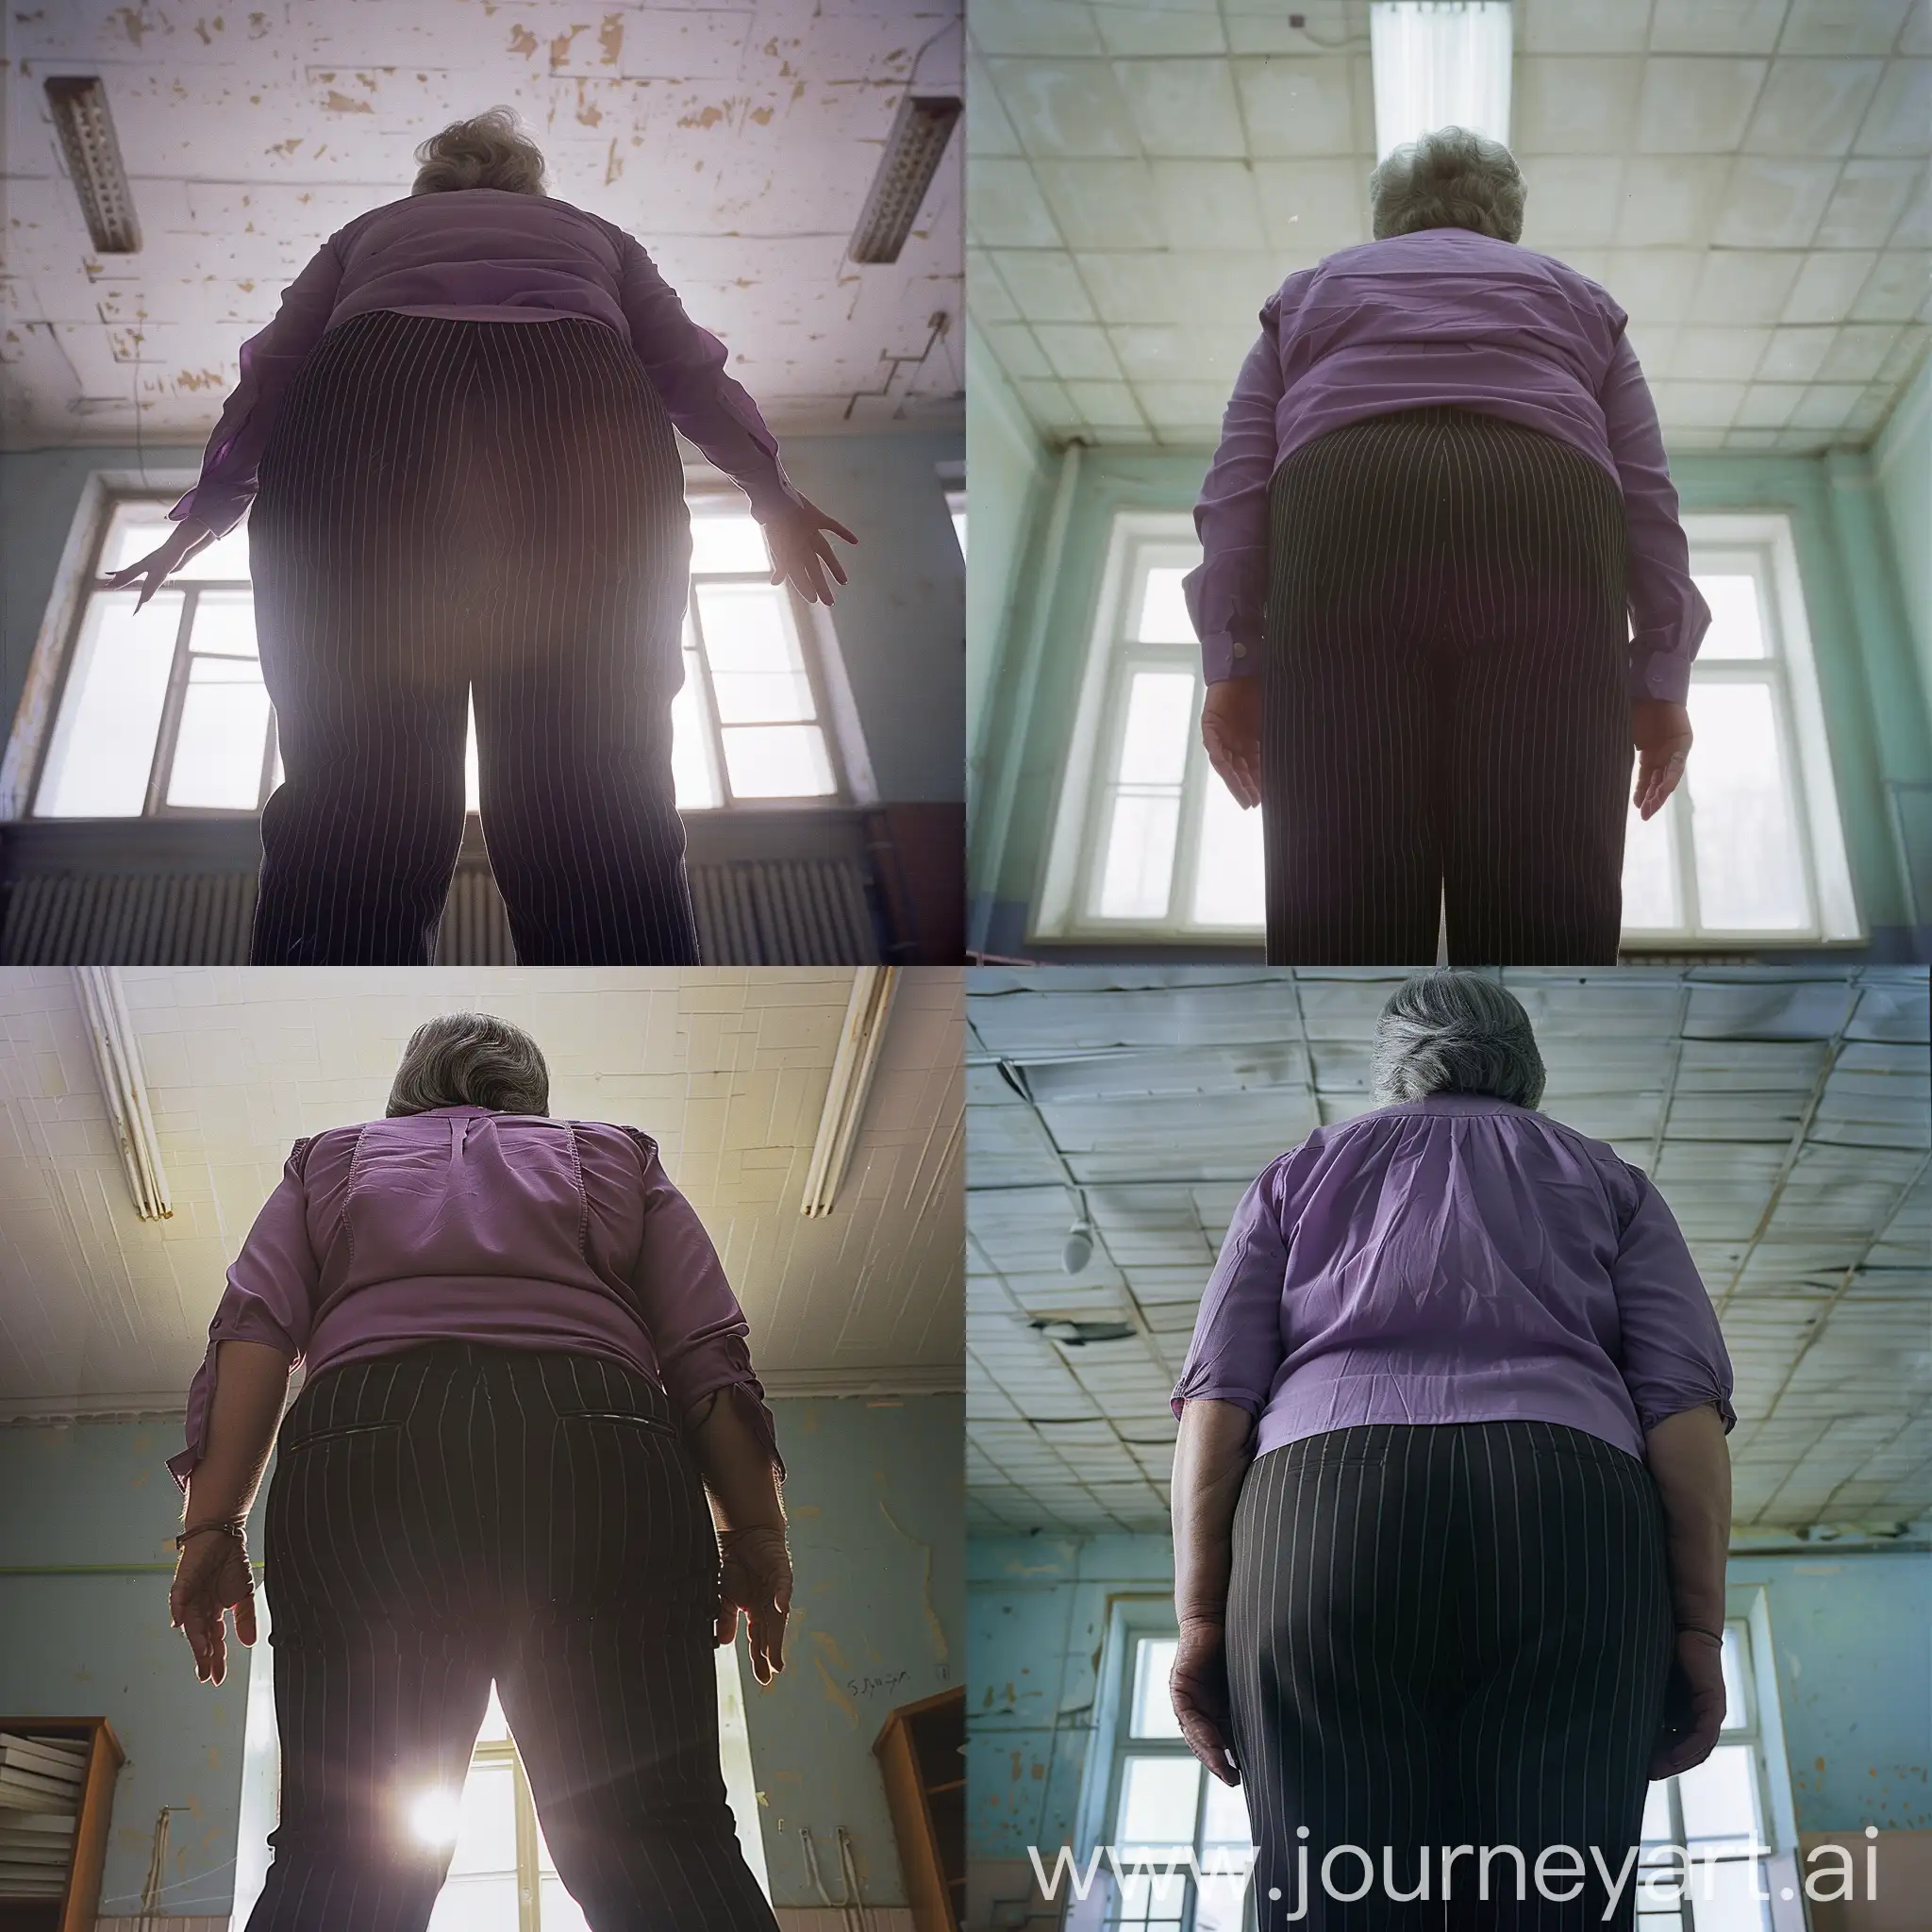 Vintage-Soviet-Classroom-Scene-Rear-View-of-Chubby-Woman-in-Violet-Shirt-and-Pinstripe-Trousers